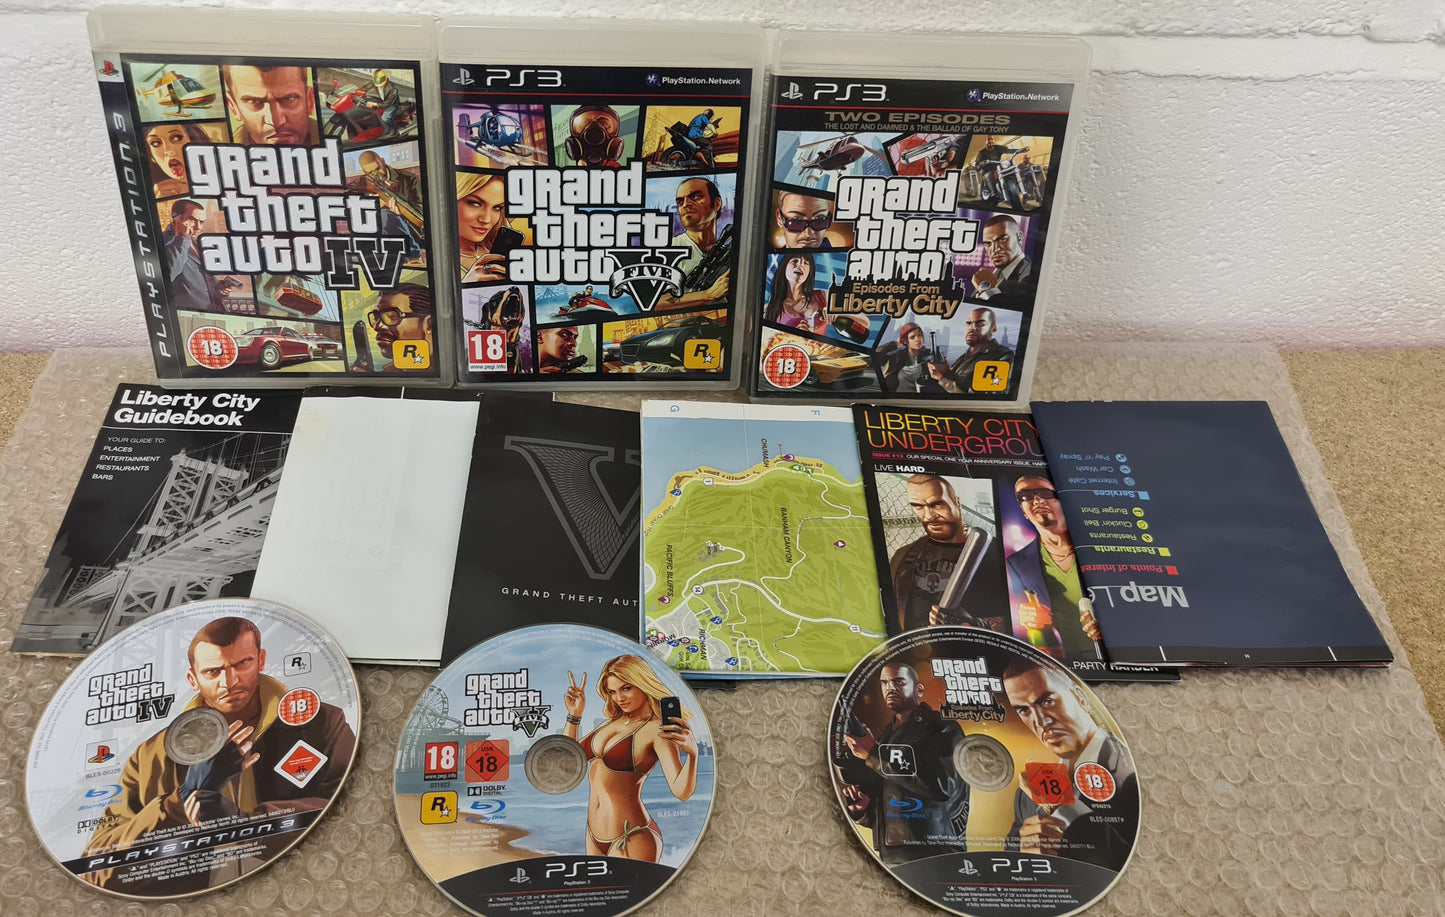 Grand Theft Auto 4, 5 & Episodes from Liberty City with Maps Sony Playstation 3 (PS3) Game Bundle